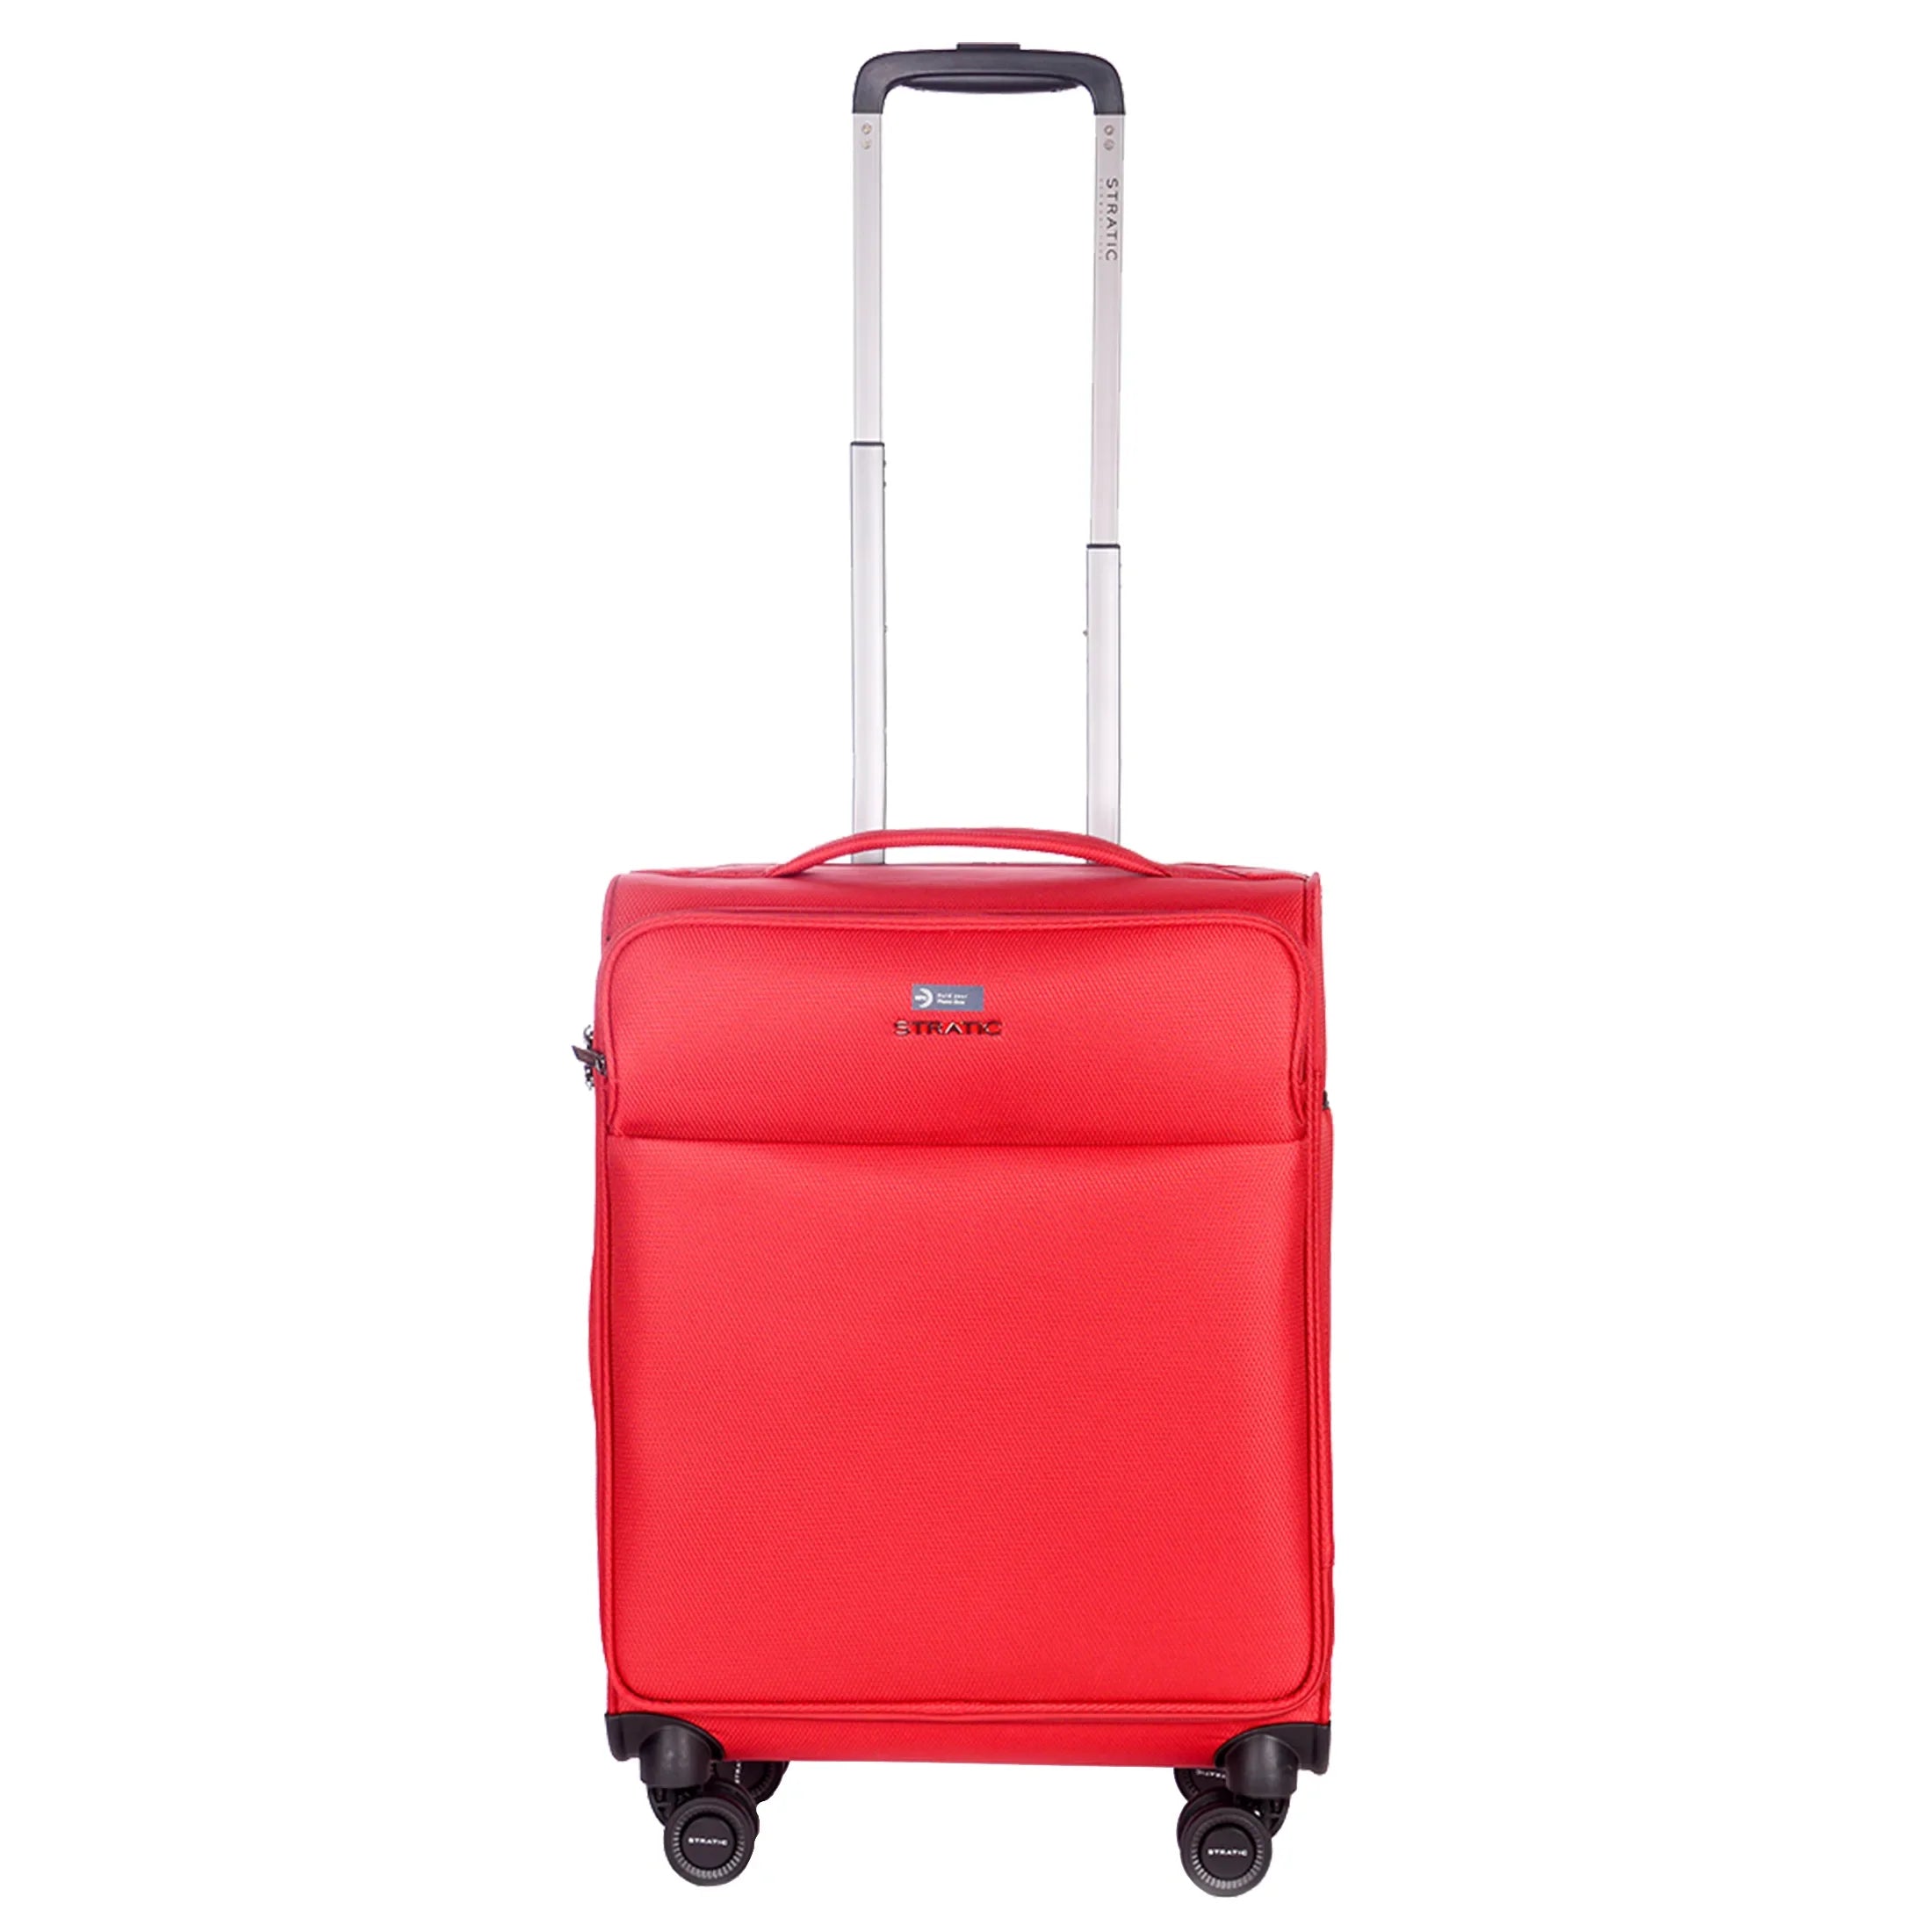 Stratic Light + 4-Rollen Kabinentrolley 55 cm - Red